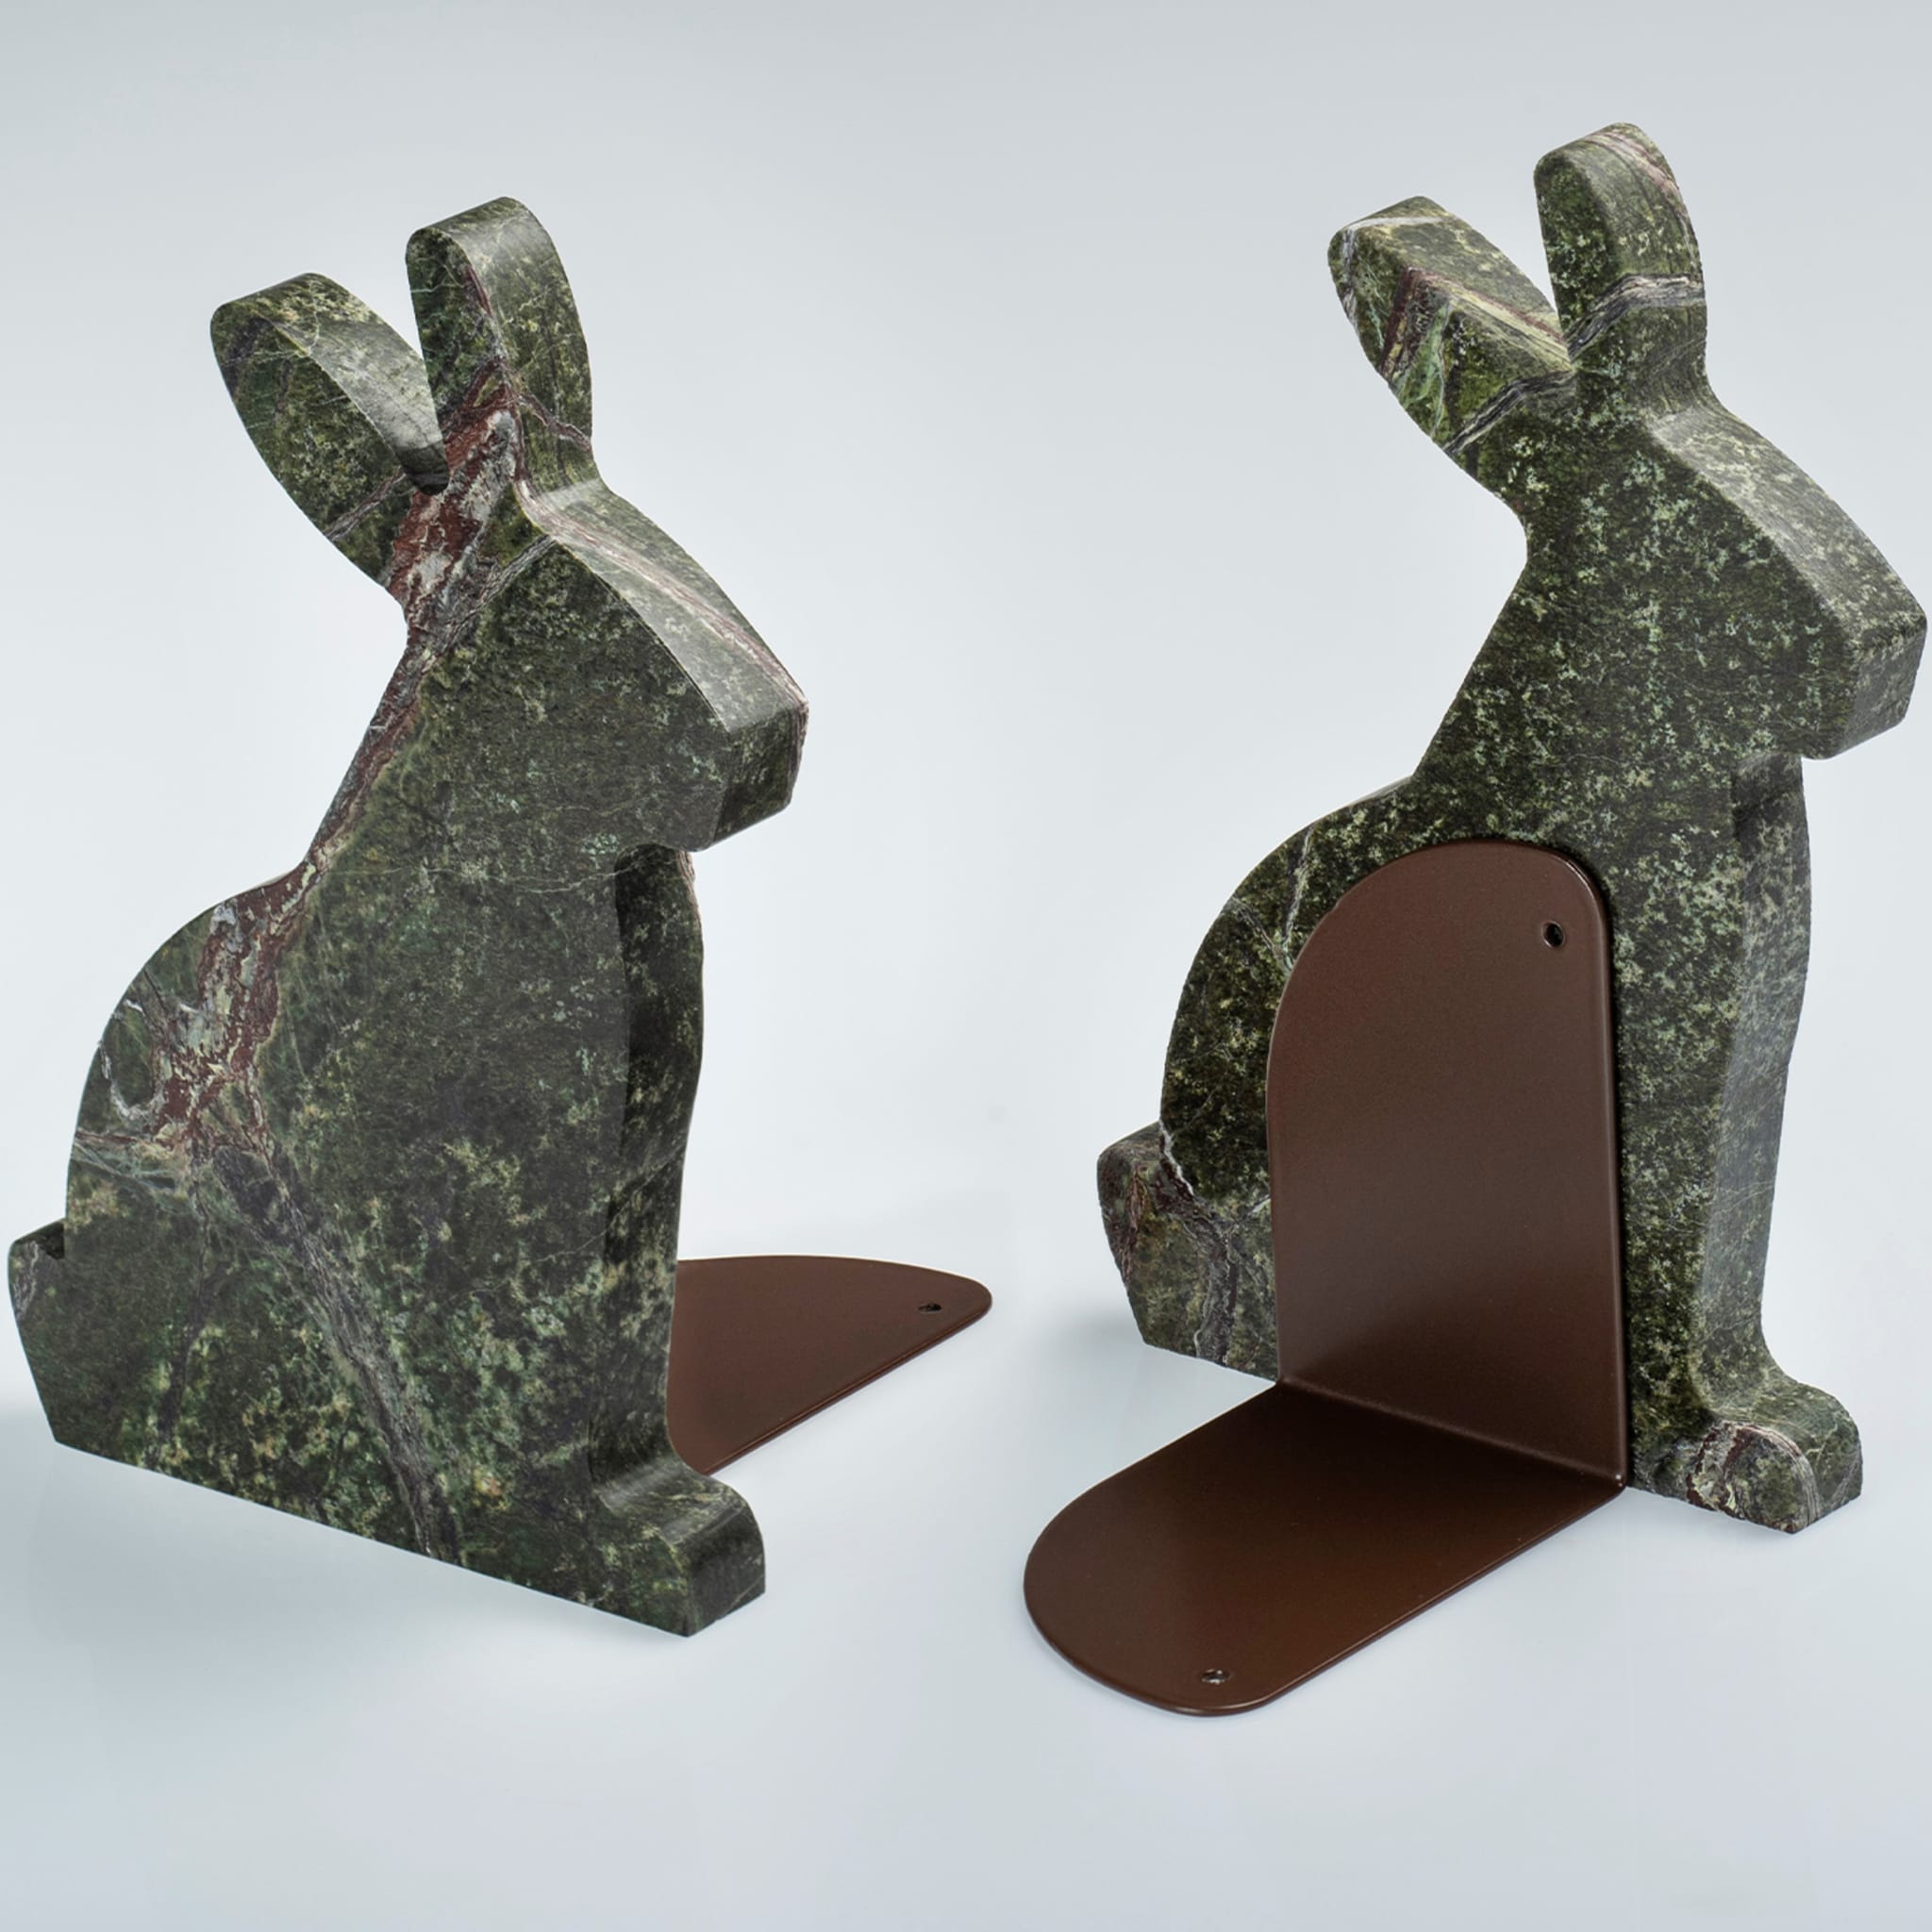 Bunny Picasso Green Right Bookend by Alessandra Grasso - Alternative view 2